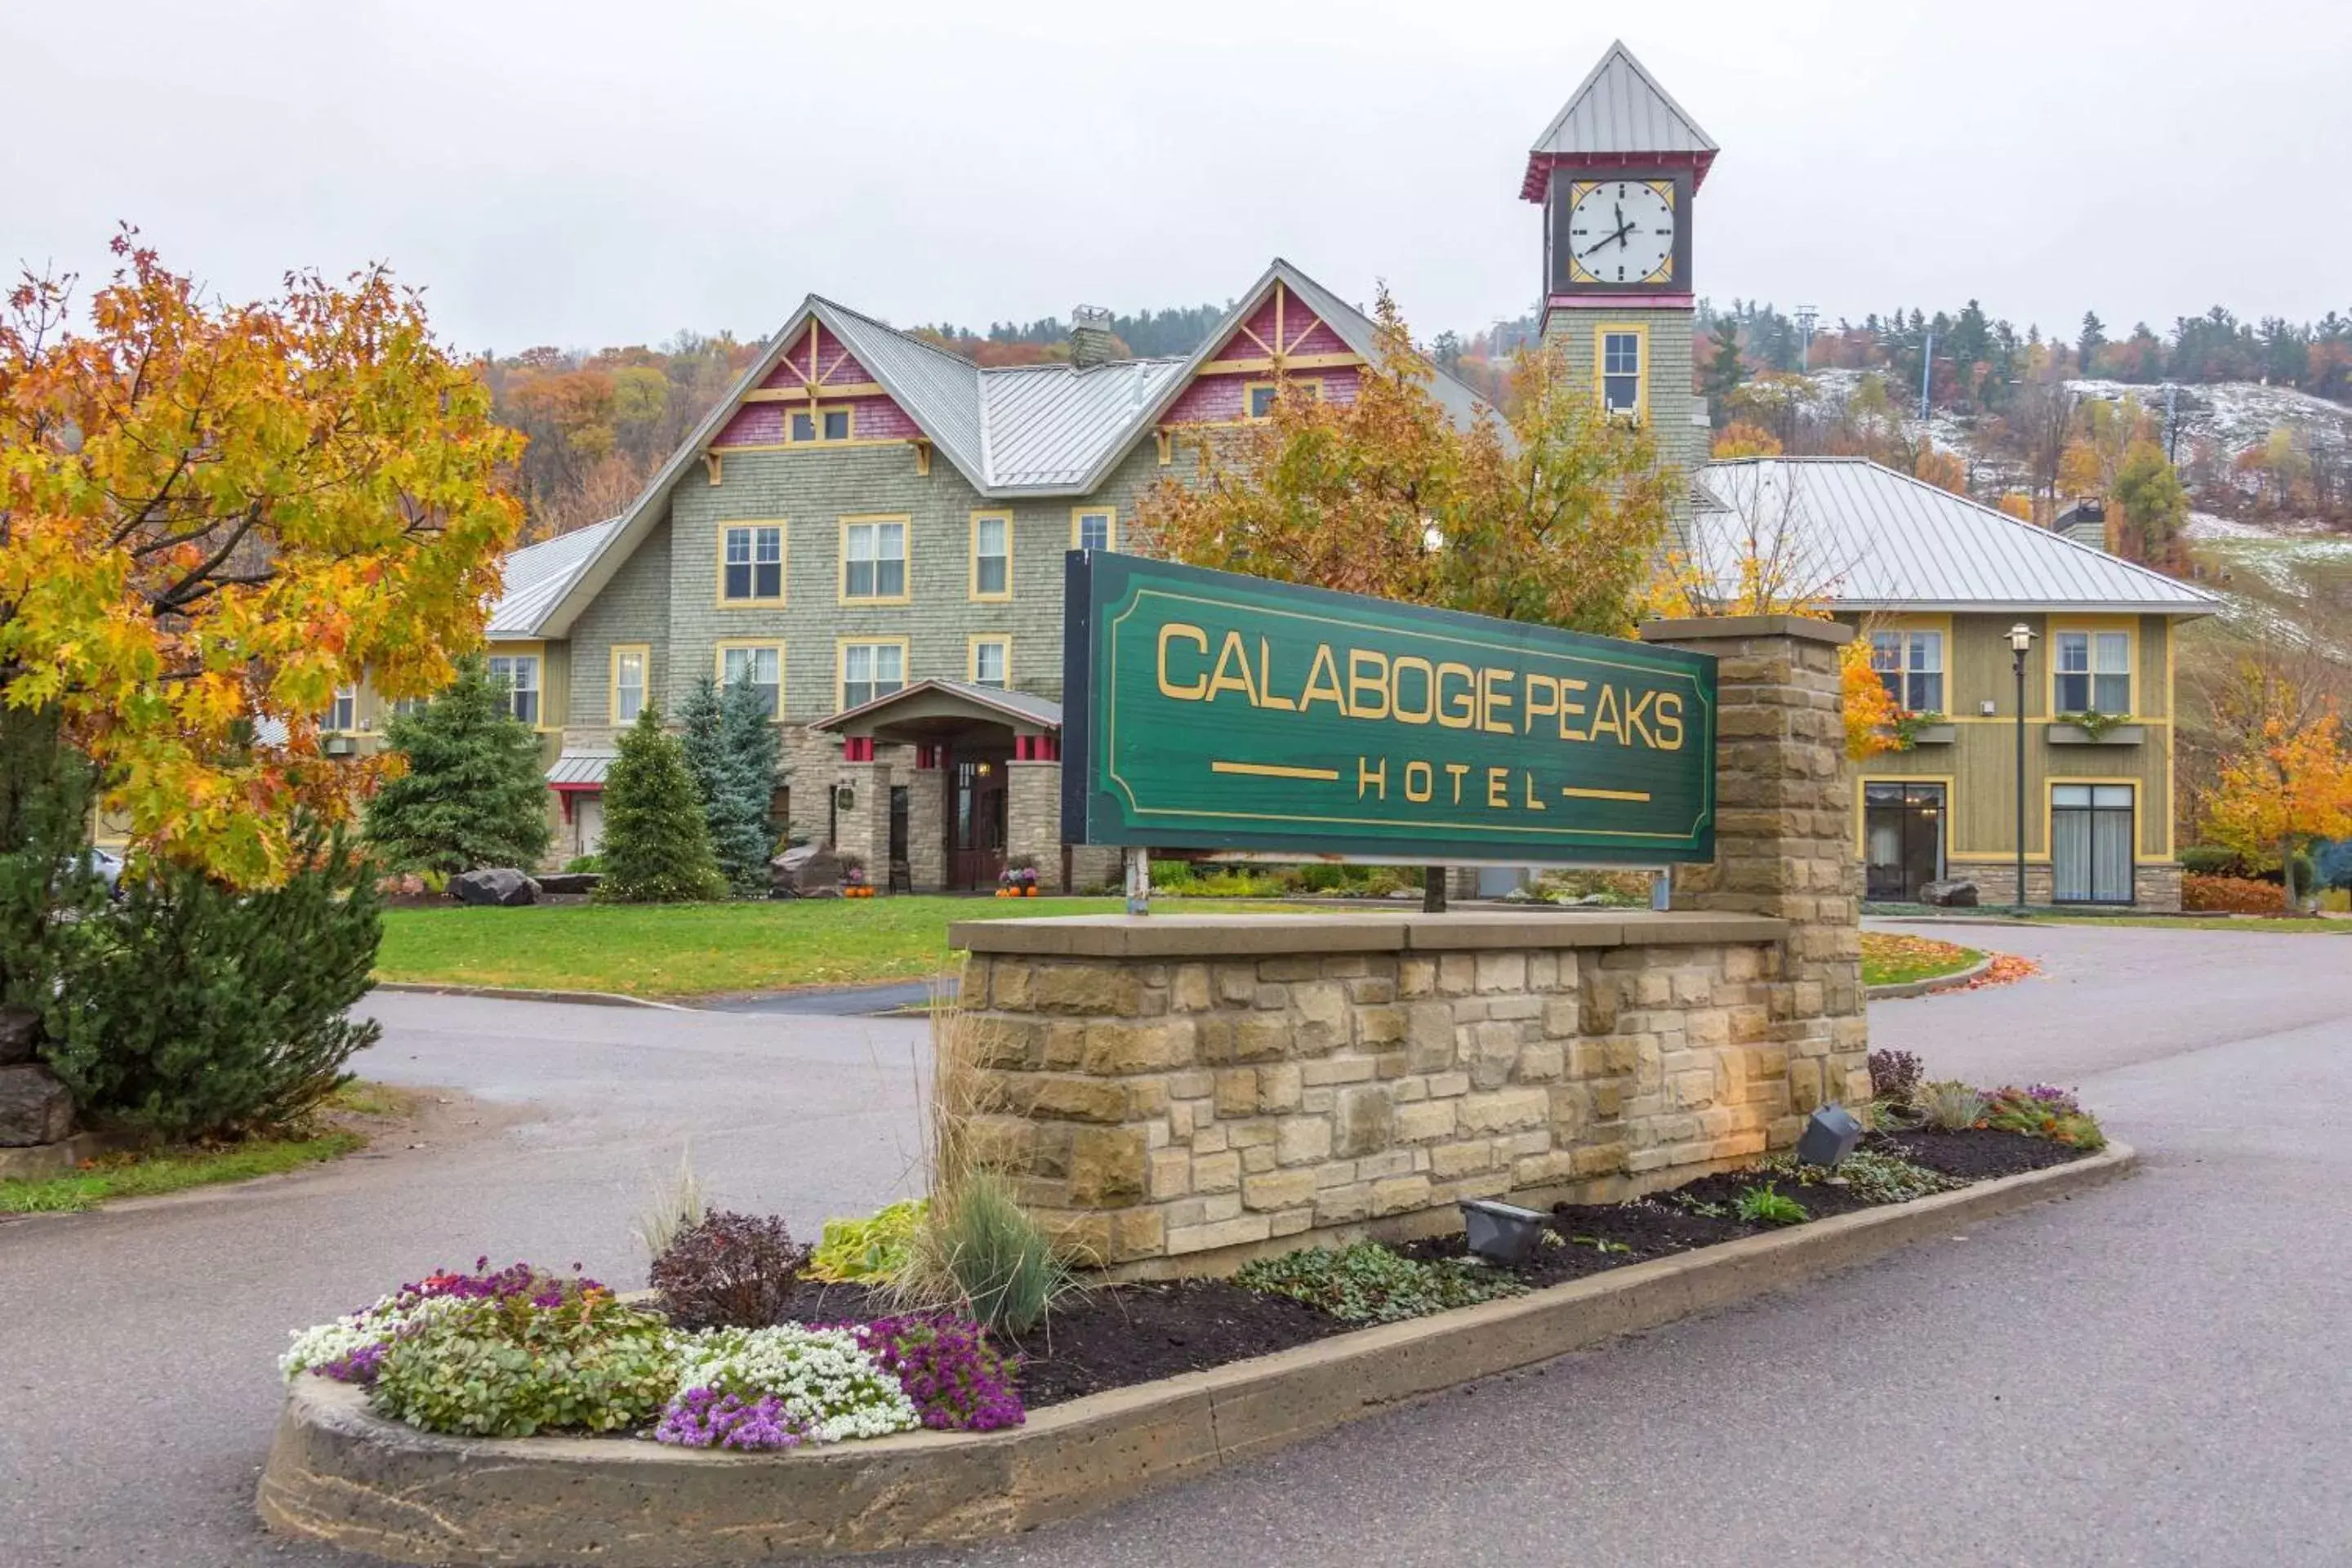 Property building in Calabogie Peaks Hotel, Ascend Hotel Collection